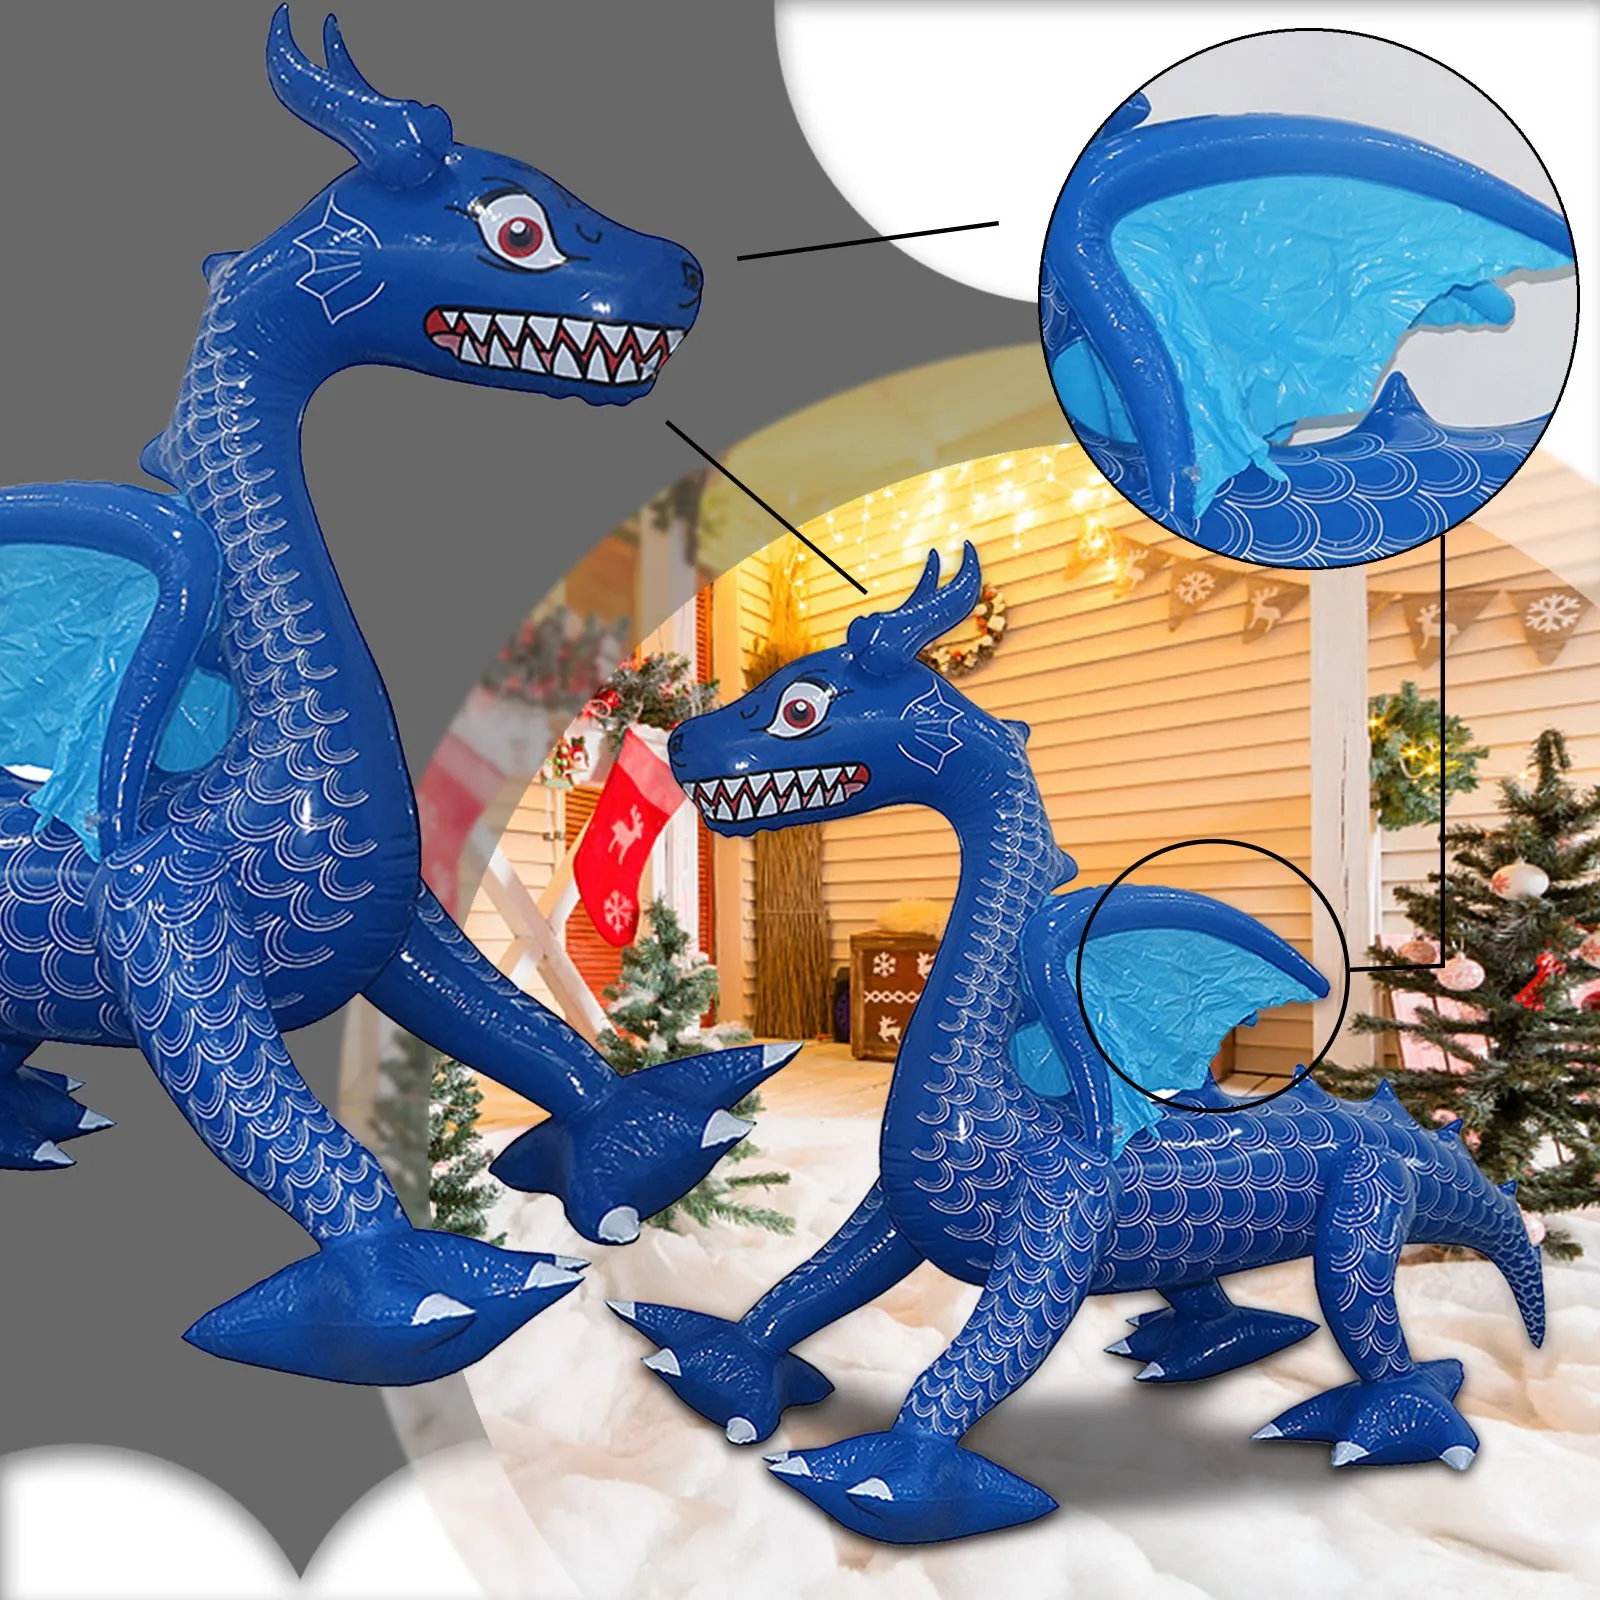 

Pvc Inflatabletoy Balloon Courtyard Atmosphere Party Decoration Inflatable Dinosaur Outdoor Interesting Birthday Decoration#8